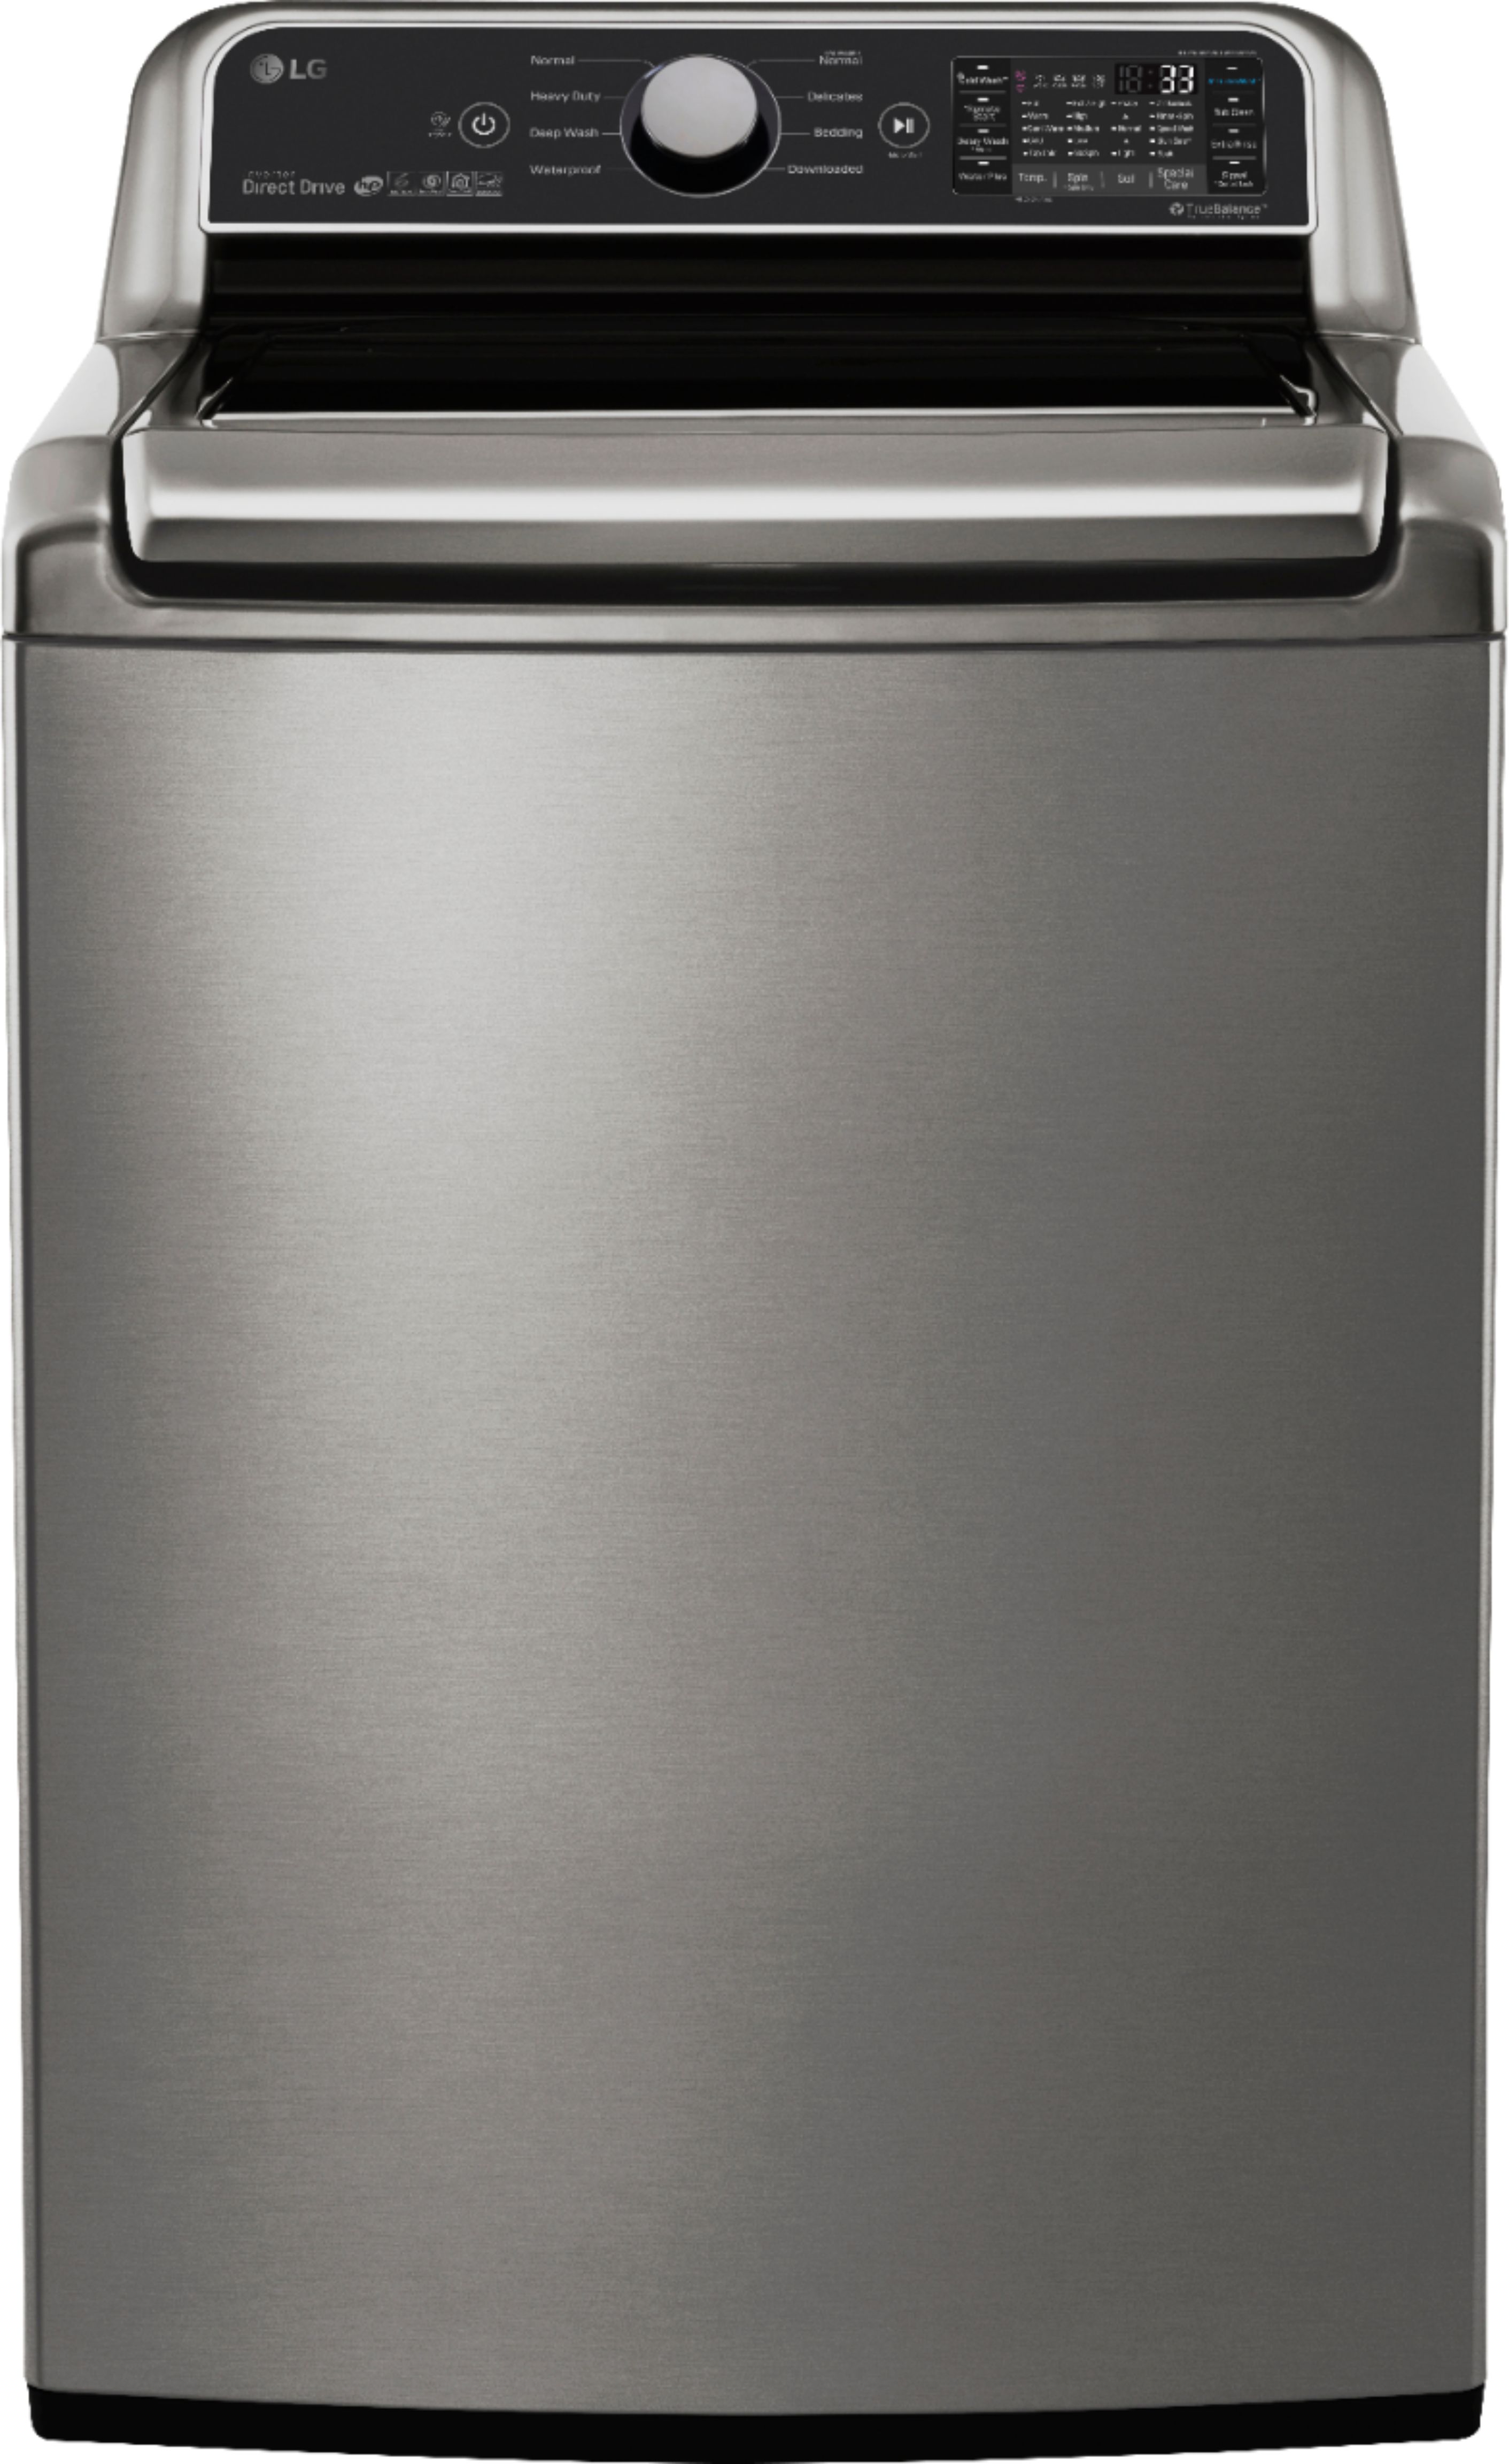 LG - 5.0 Cu. Ft. 8-Cycle Top-Loading Washer - Graphite Steel